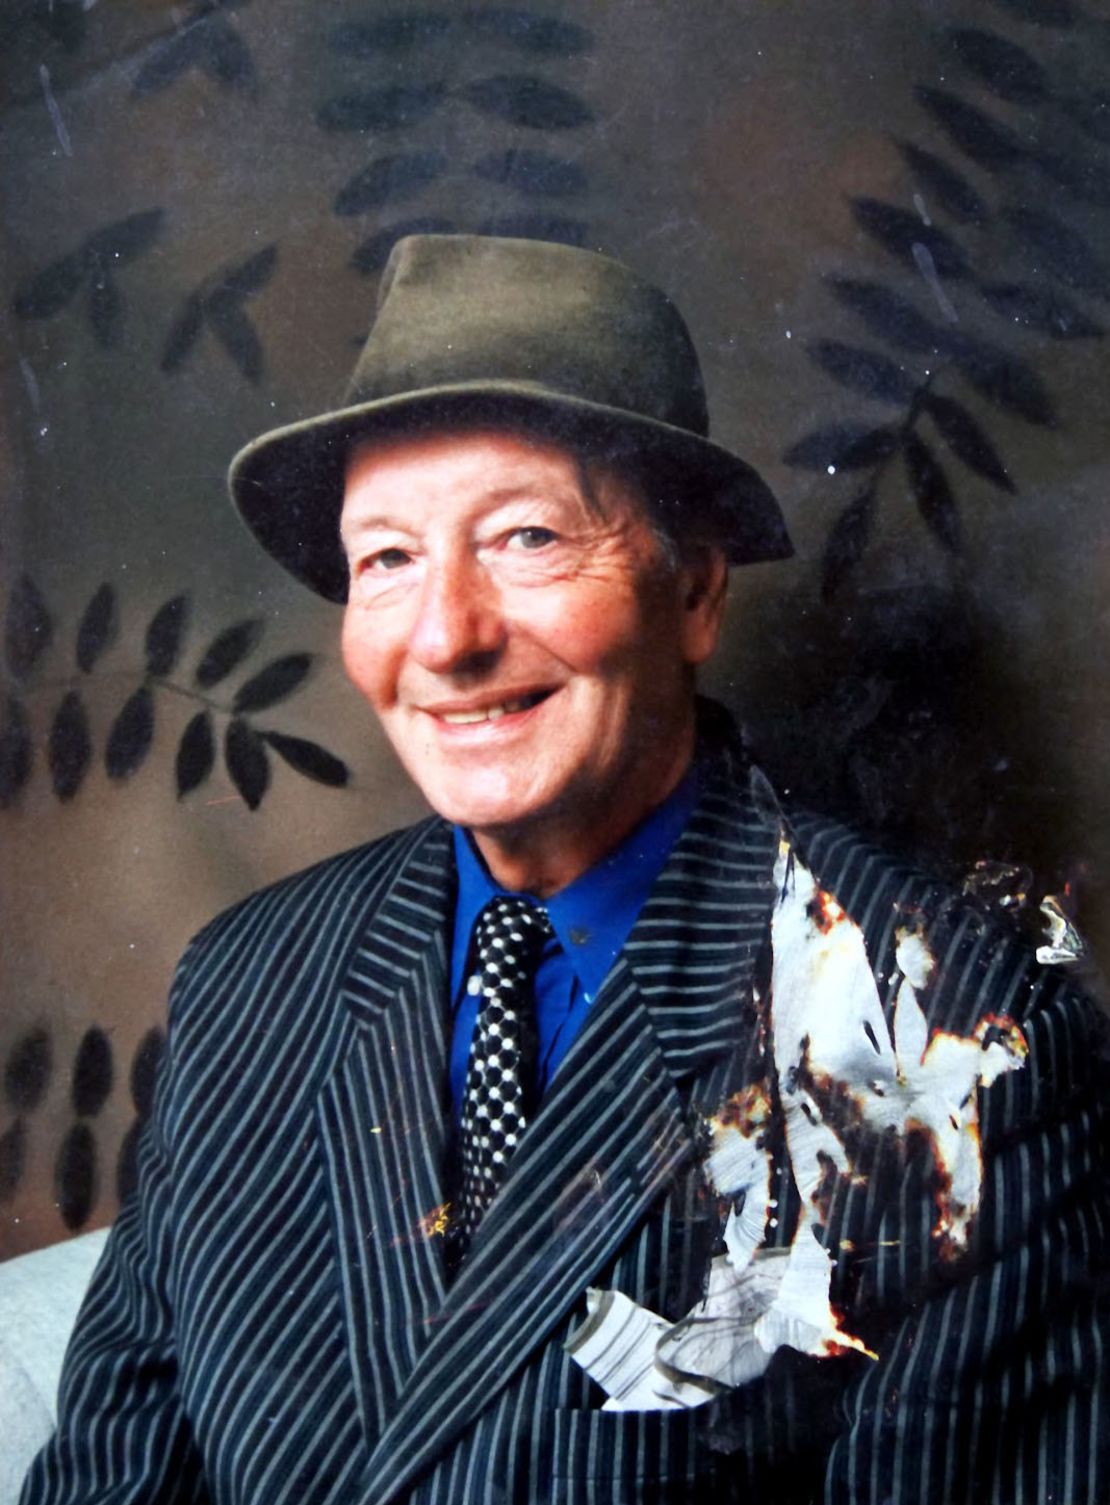 The artist is remembered as "flamboyant" and "outlandish" by his niece, Jan Williams.